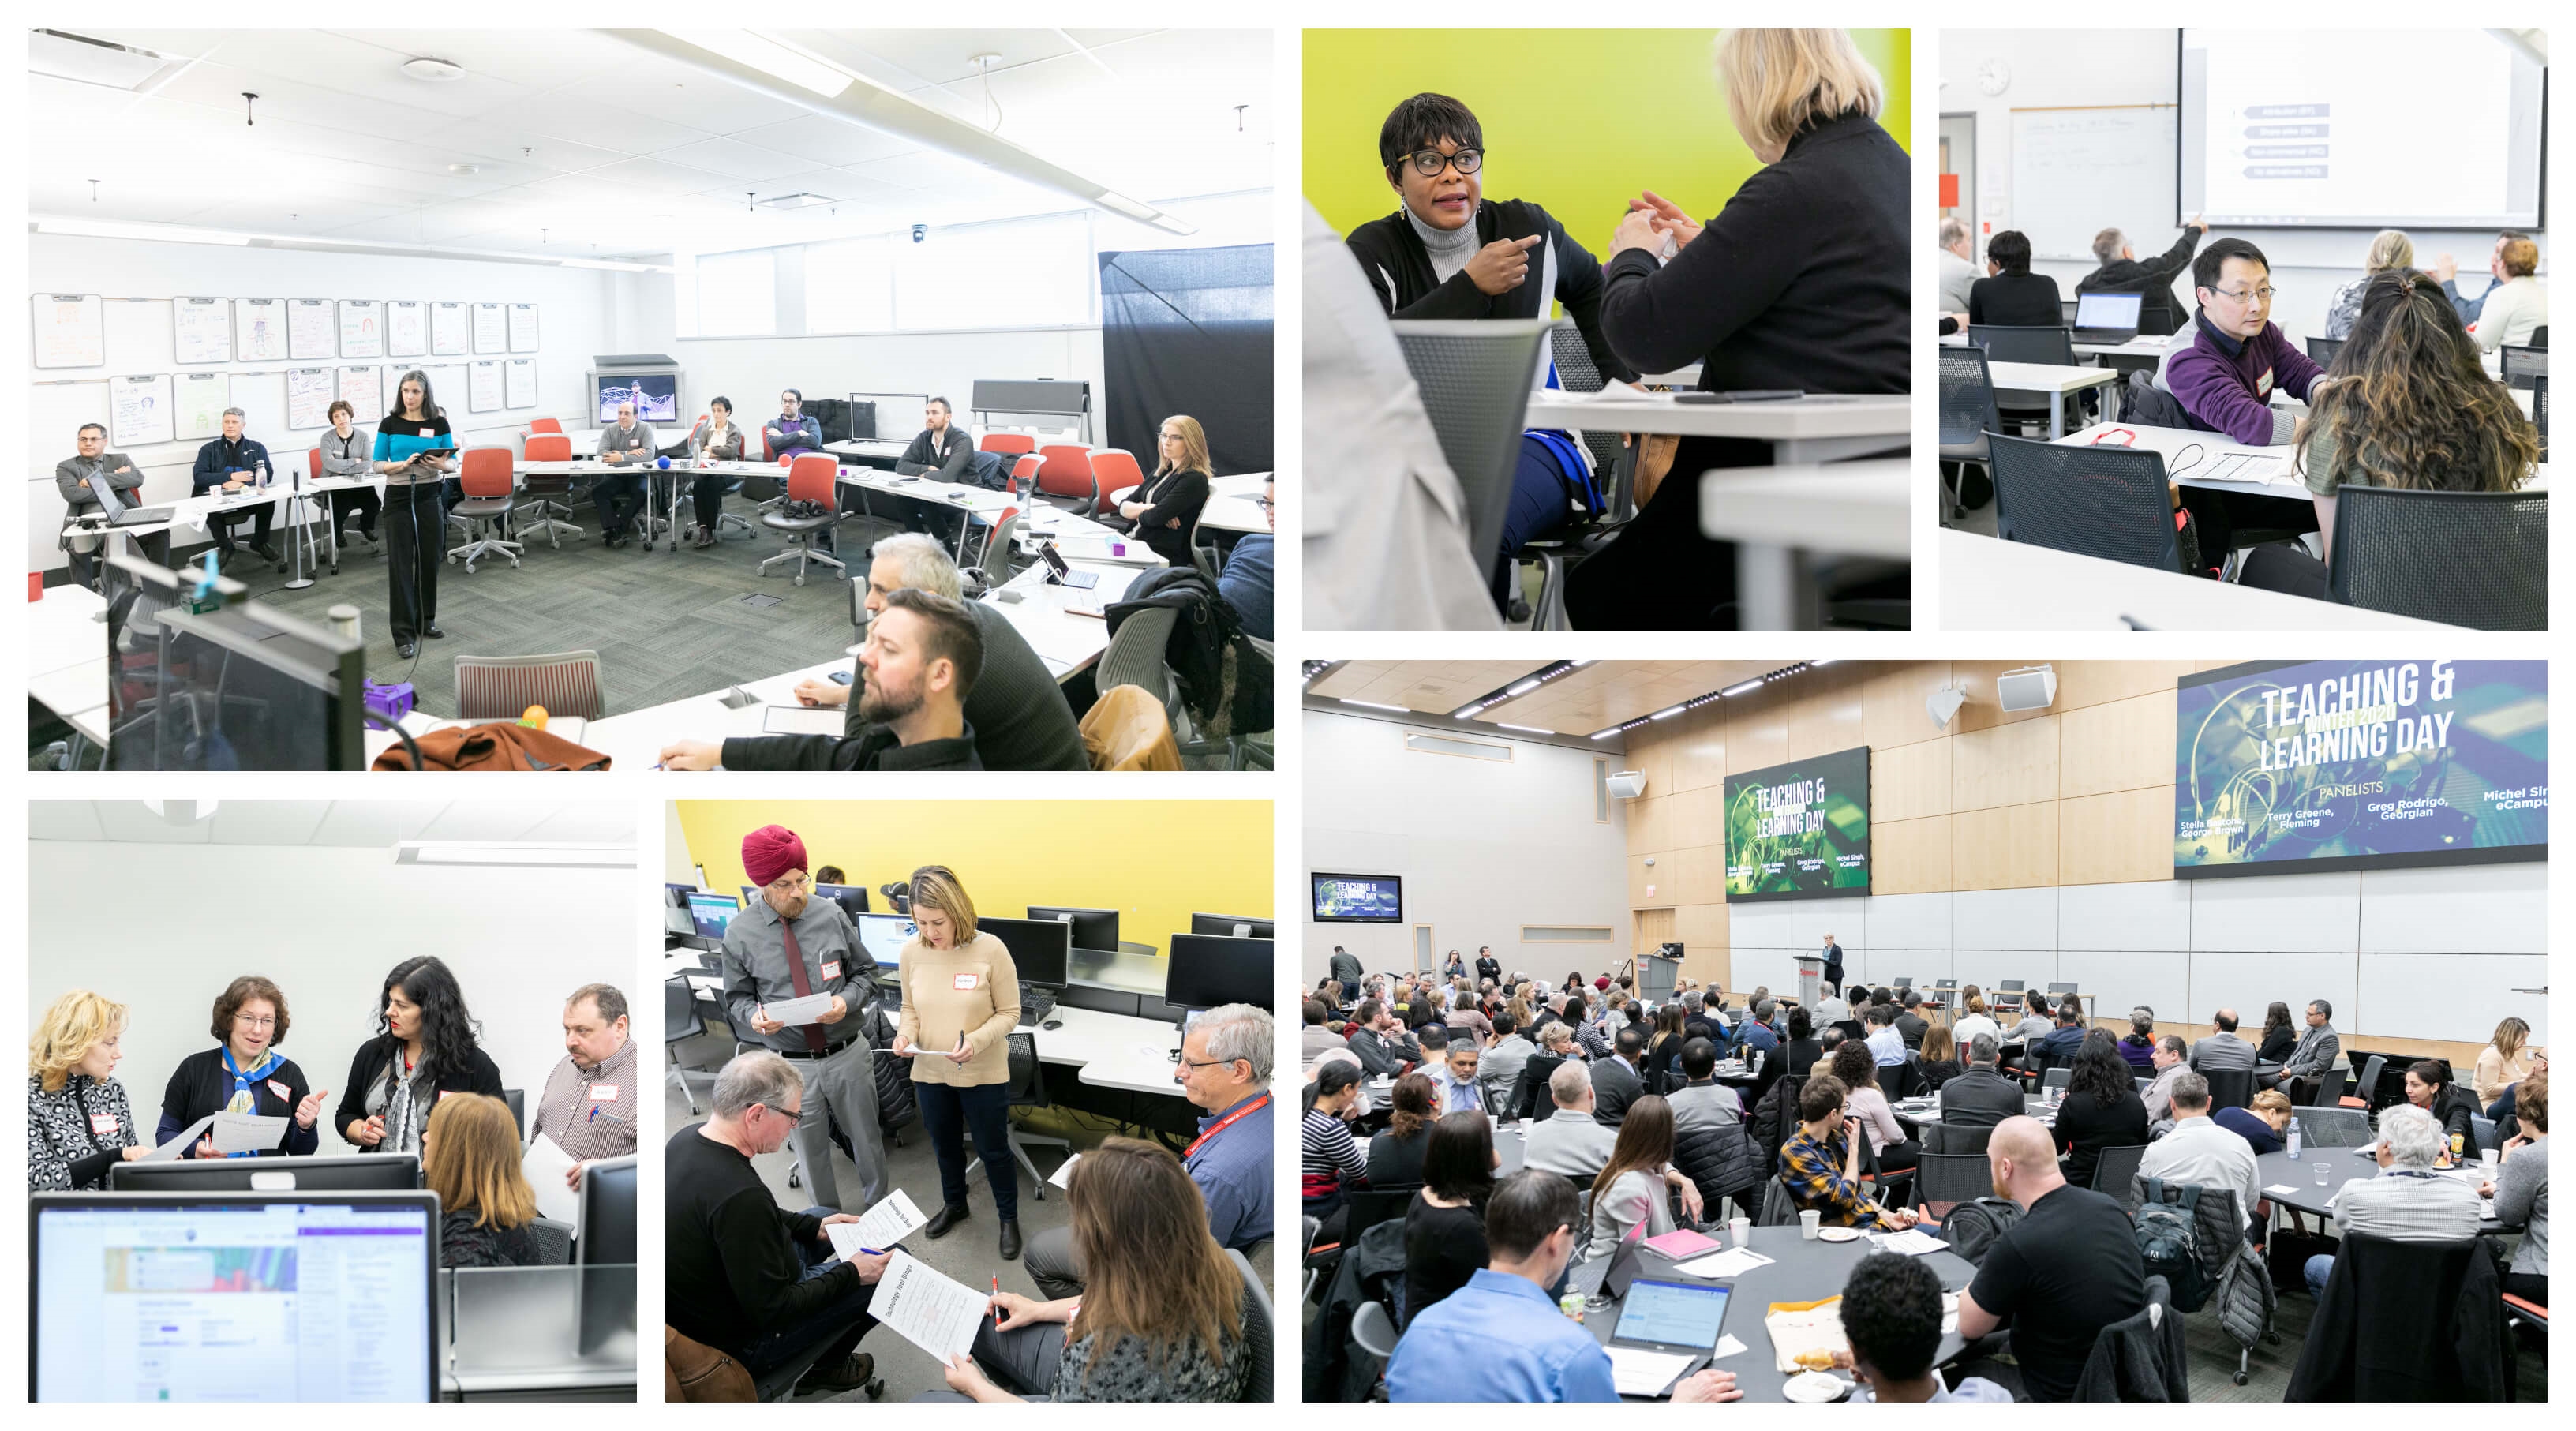 A collage of images from Teaching & Learning Day Winter 2020